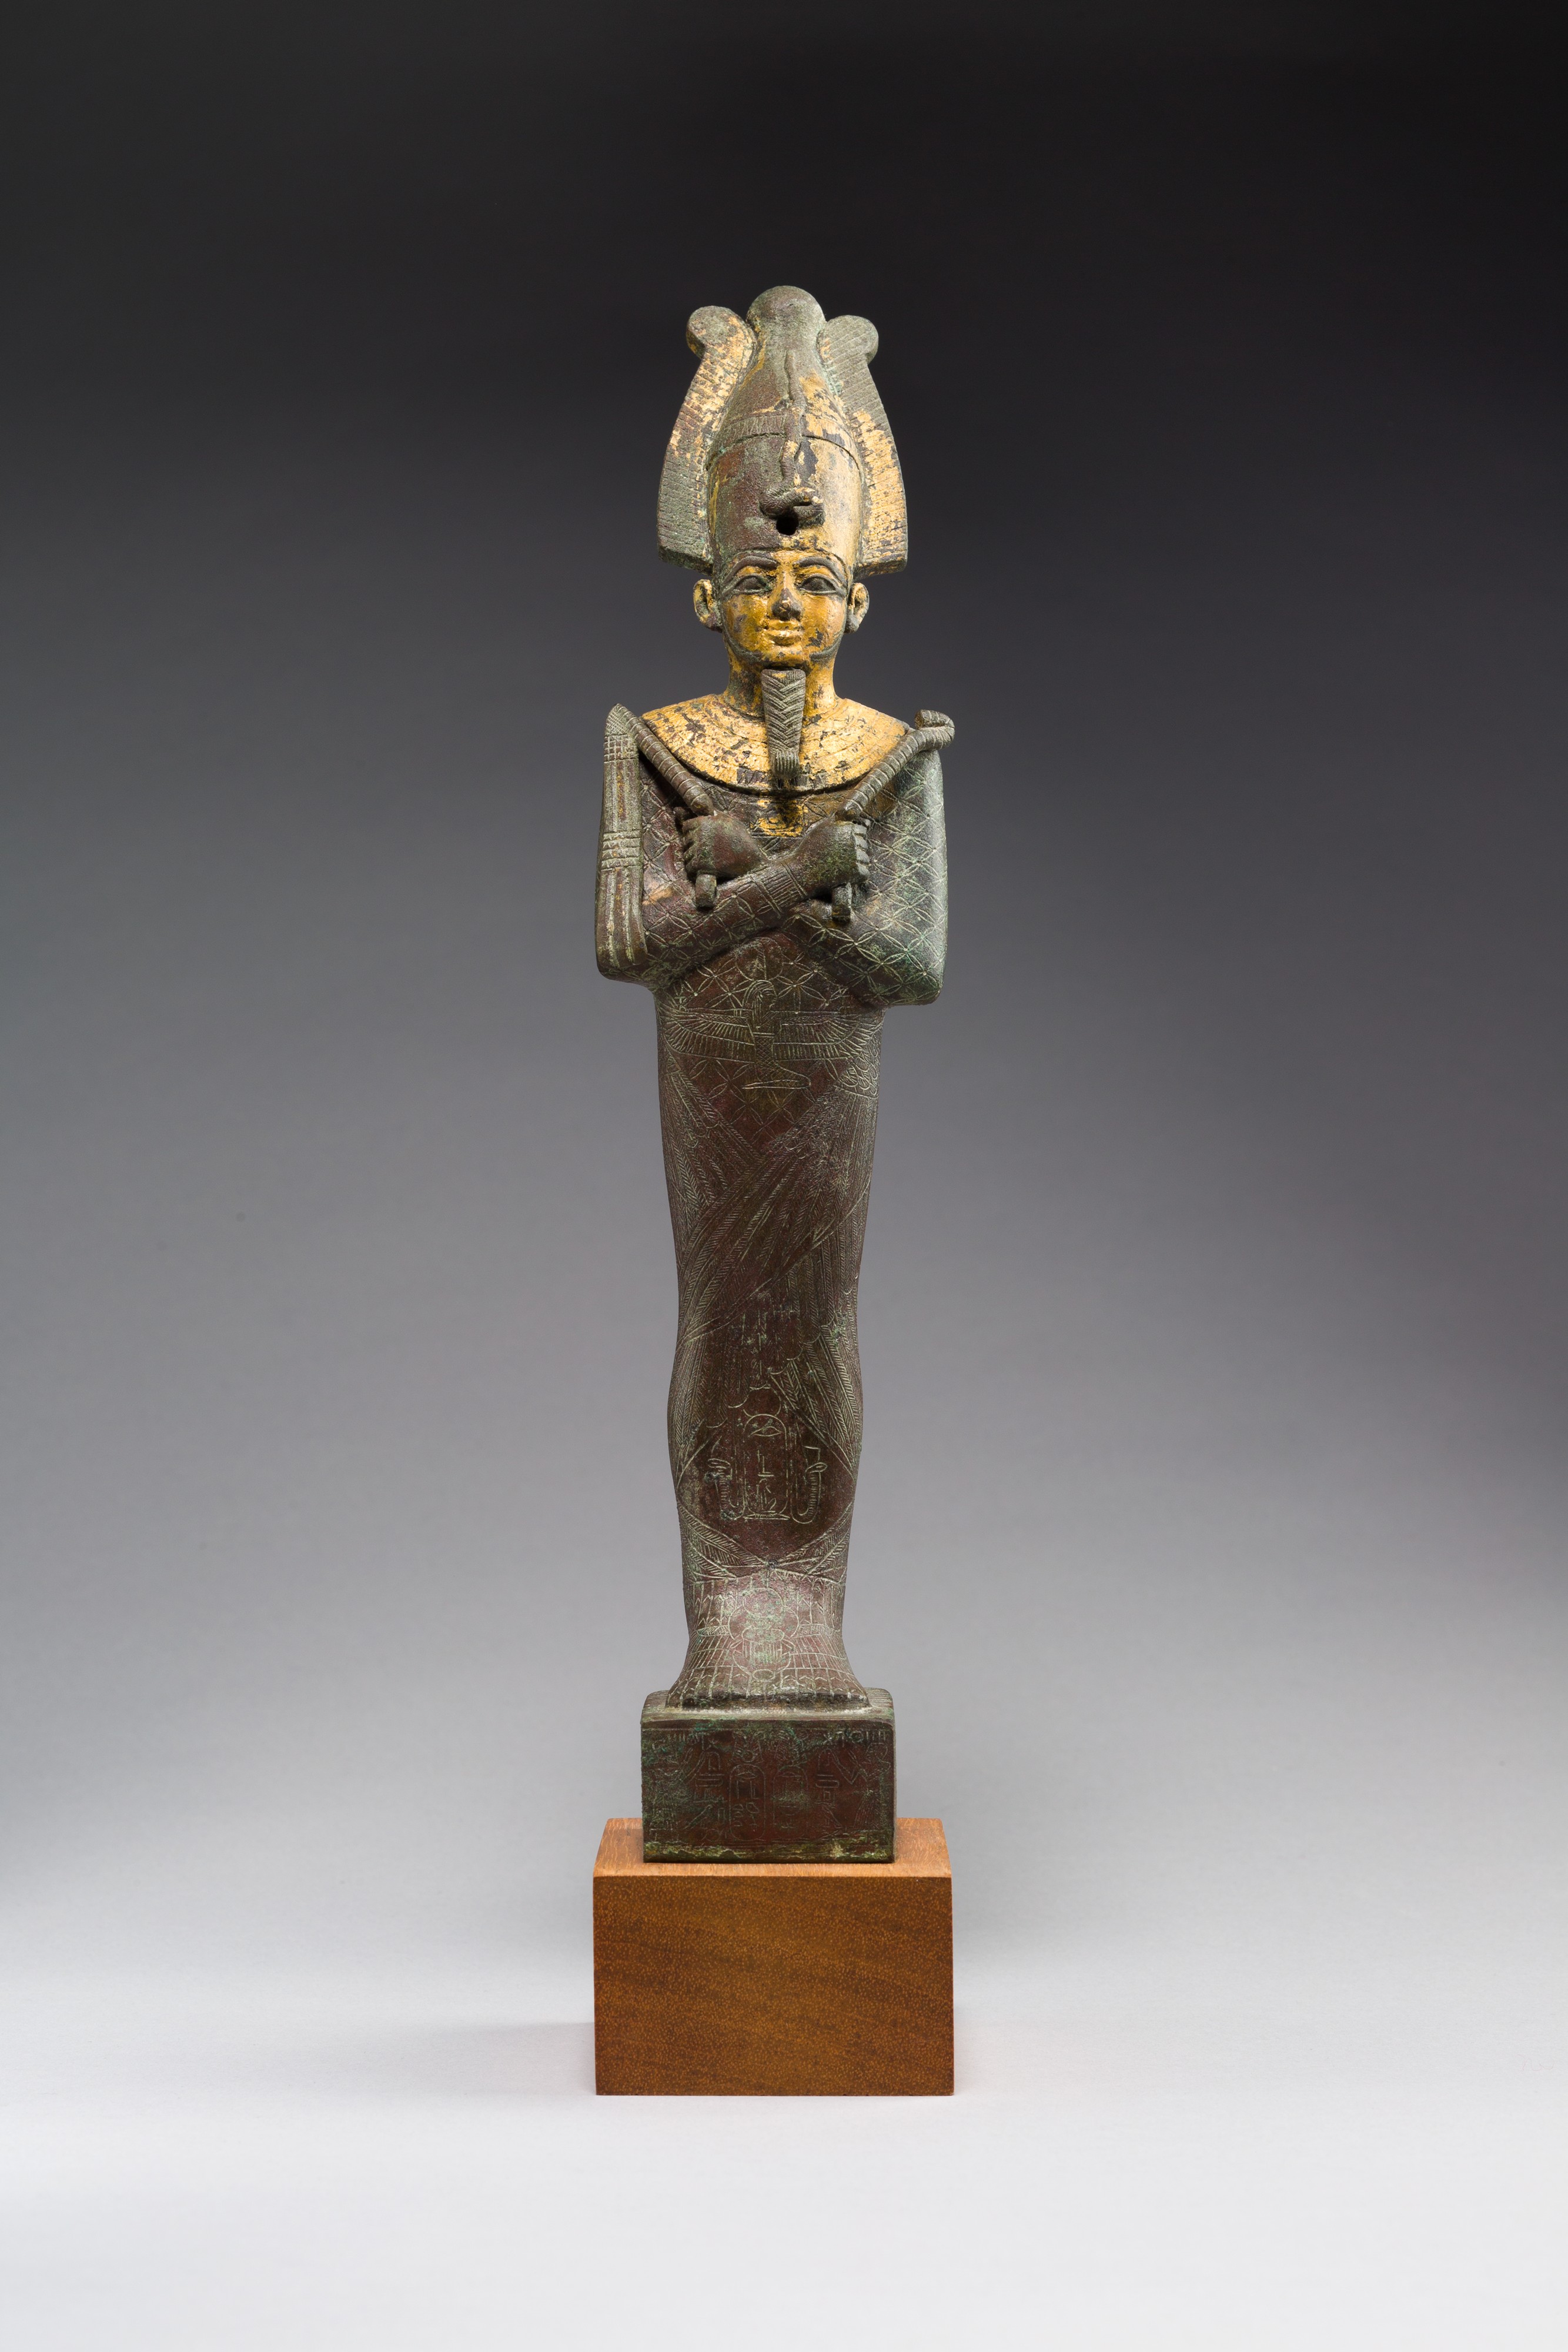 Statuette of Osiris with the epithets Neb Ankh and Khentyimentiu, donated  by Padihorpare | Late Period | The Metropolitan Museum of Art